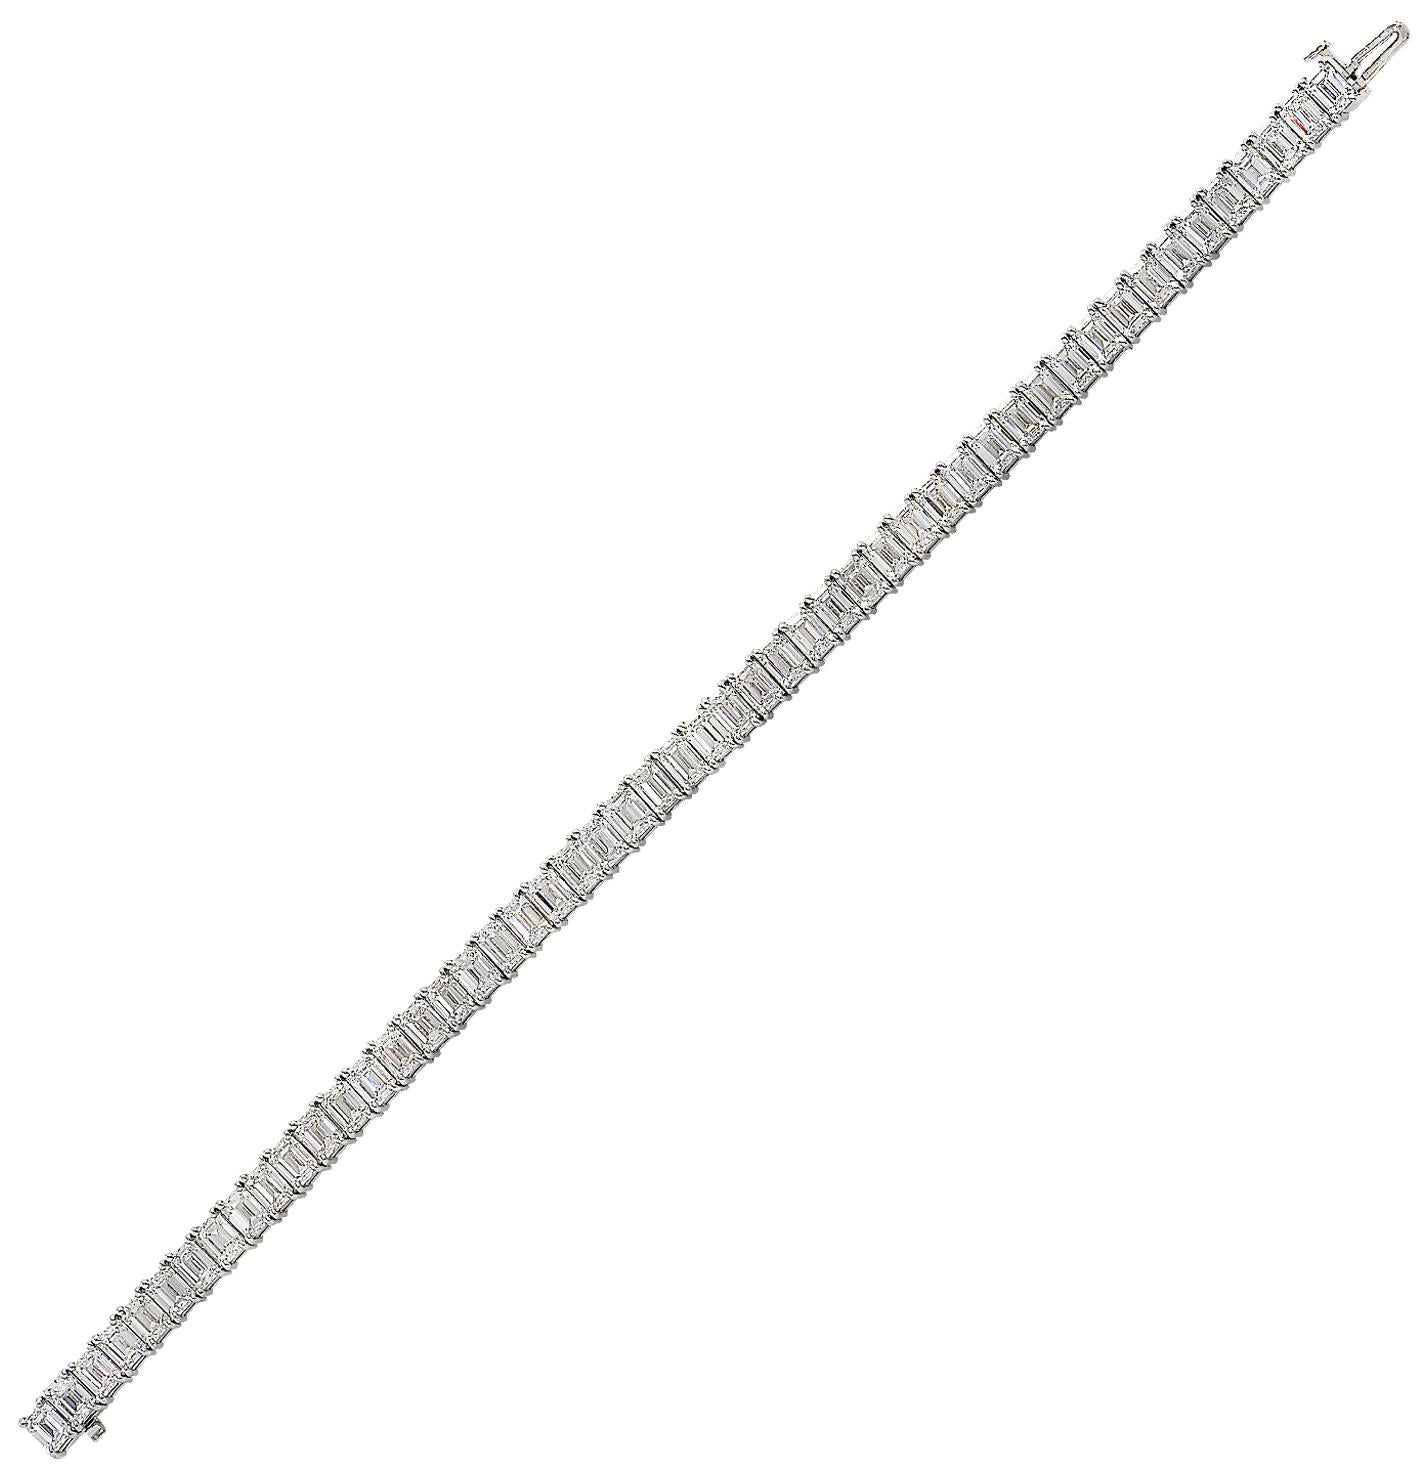 Exquisite Vivid Diamonds tennis bracelet crafted in platinum, showcasing 51 emerald cut diamonds weighing 15.81 carats total, D-F color, VVS-VS clarity. Each diamond is carefully selected, perfectly matched and set in a seamless sea of eternity,